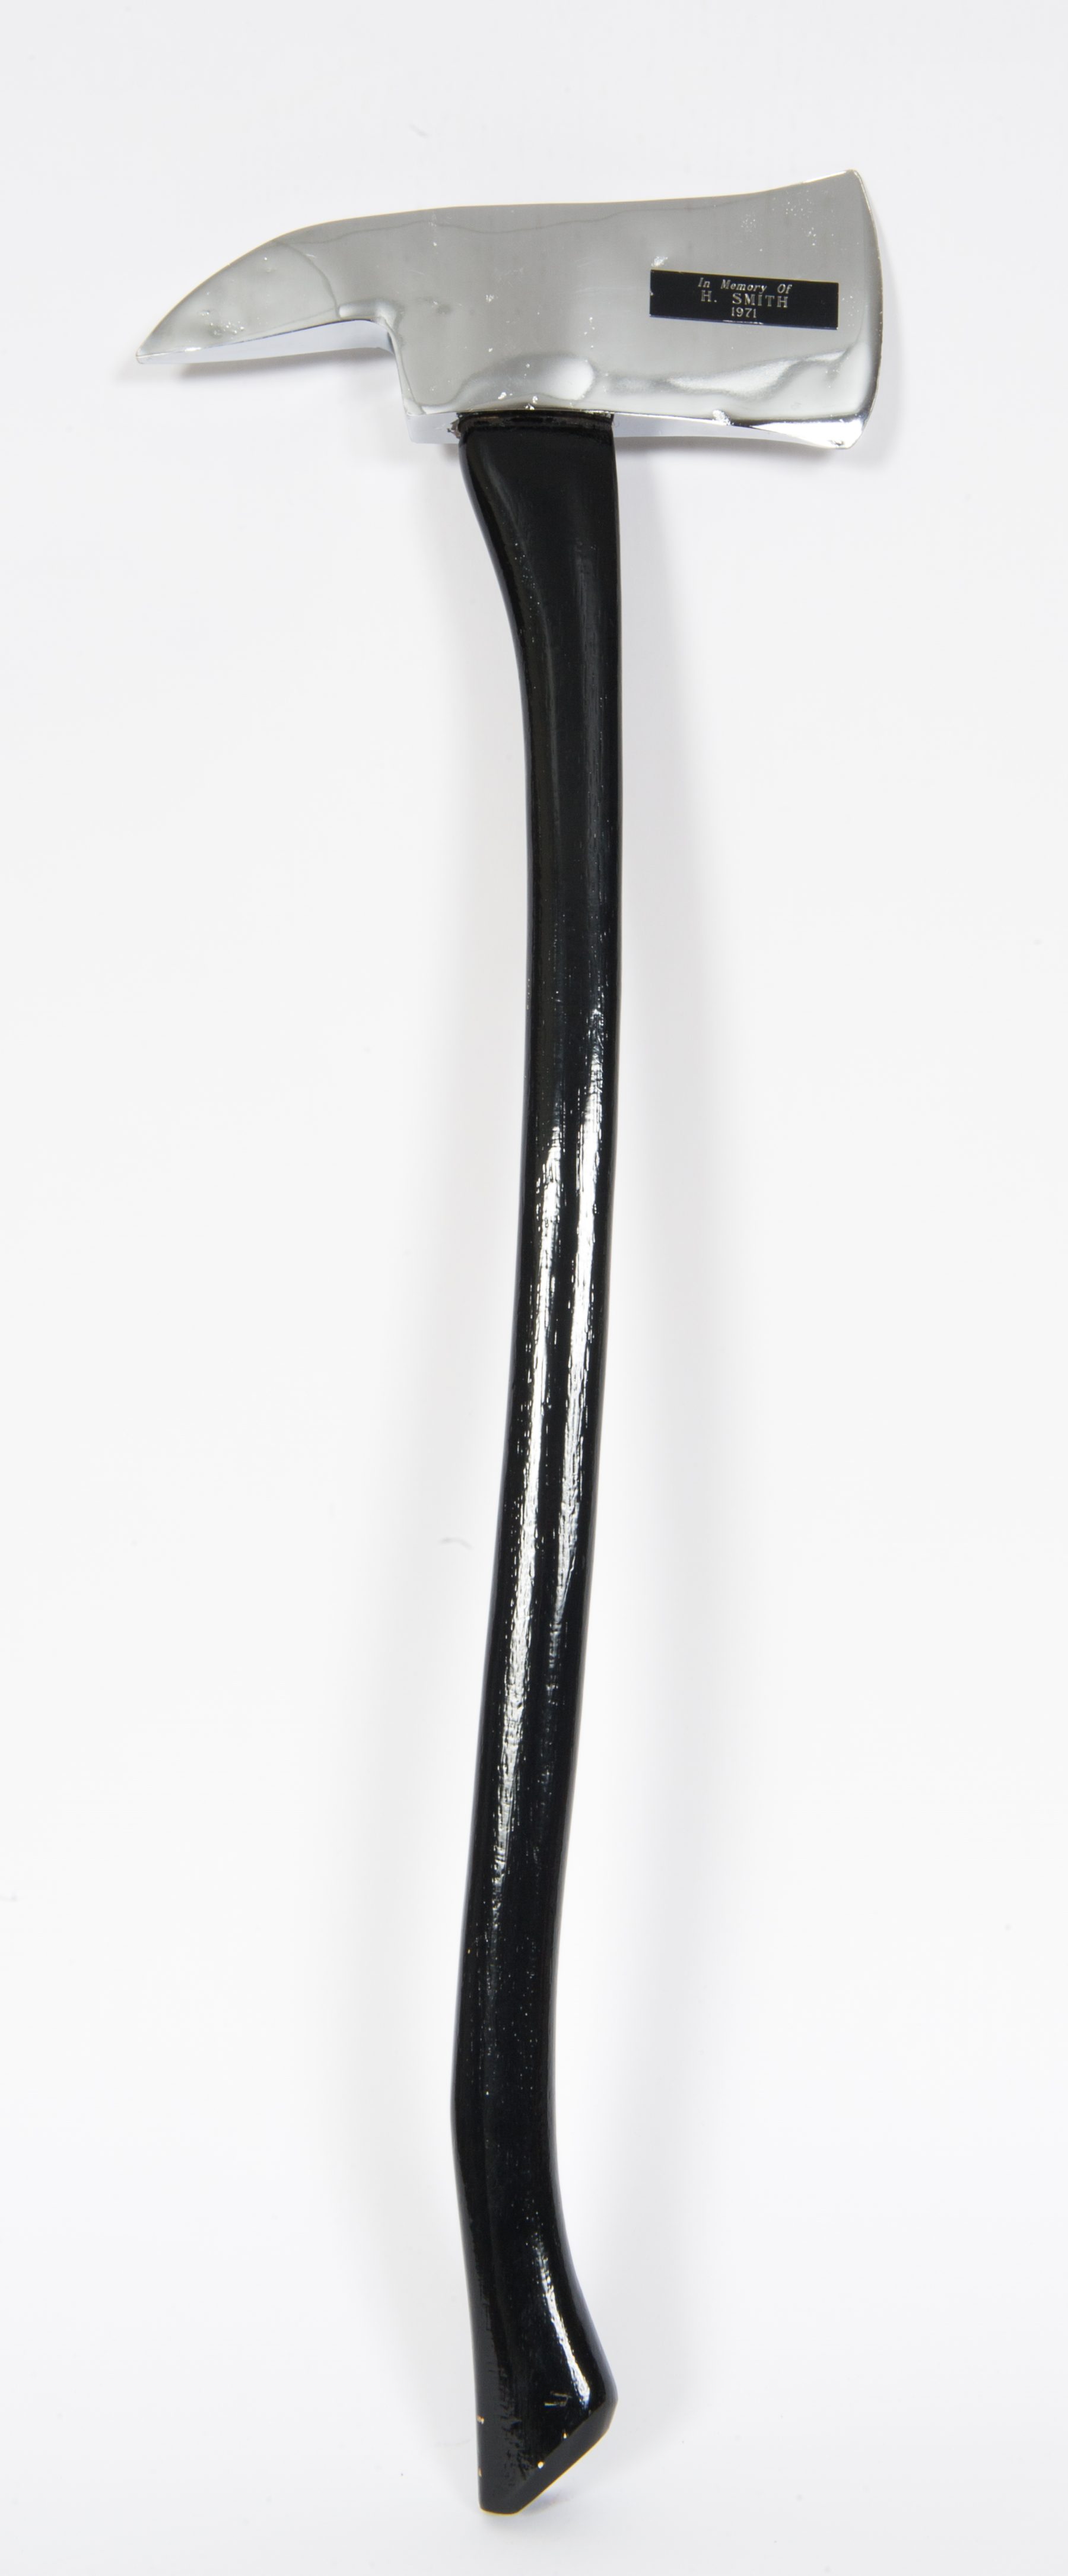 Ceremonial axe with black handle and silver head, showing the name of Harold Smith.